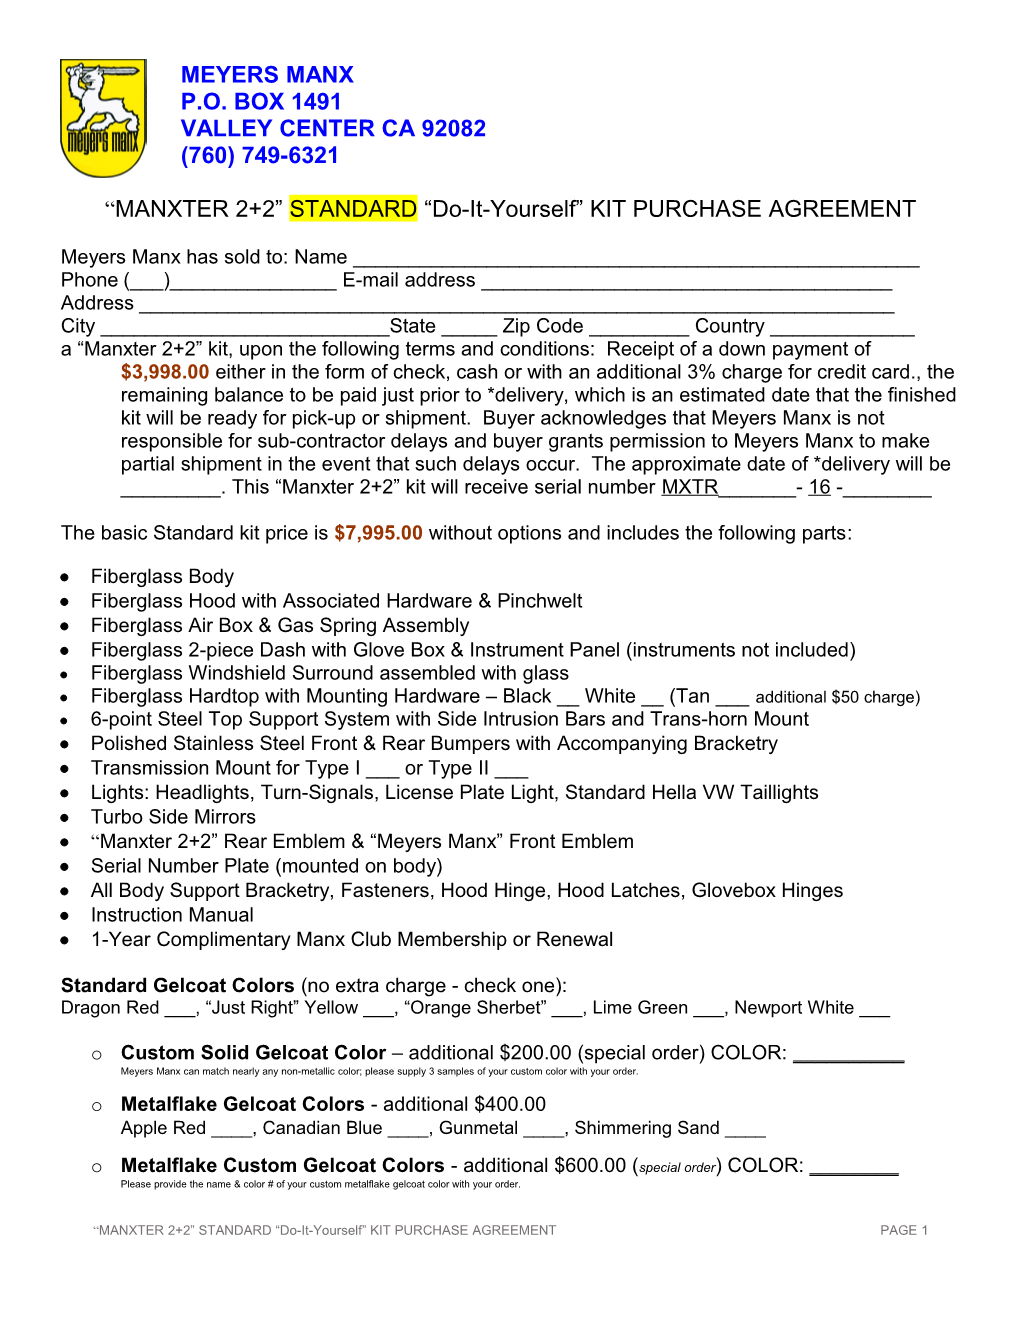 MANXTER 2+2 STANDARD Do-It-Yourself KIT PURCHASE AGREEMENT